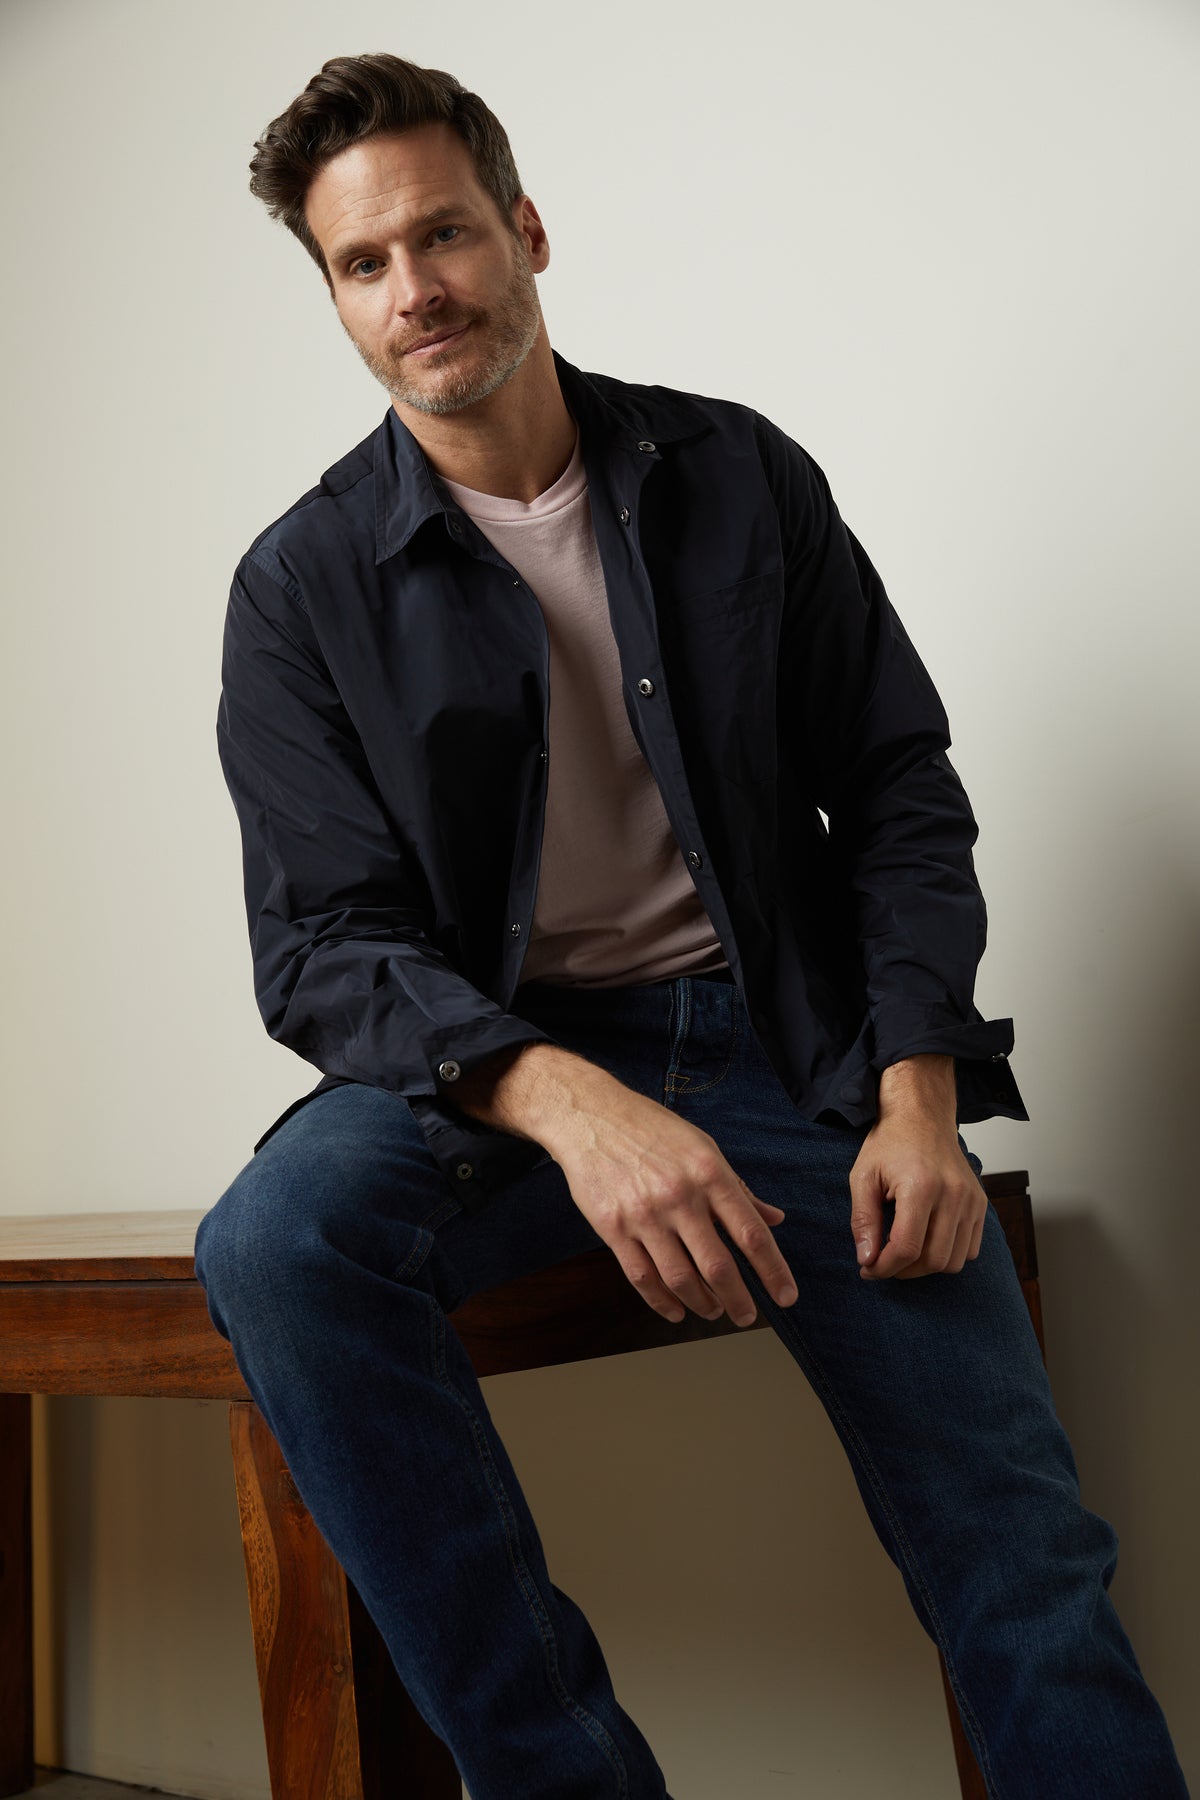 A man sitting on a wooden bench wearing Velvet by Graham & Spencer jeans and a shirt.-26679241048257